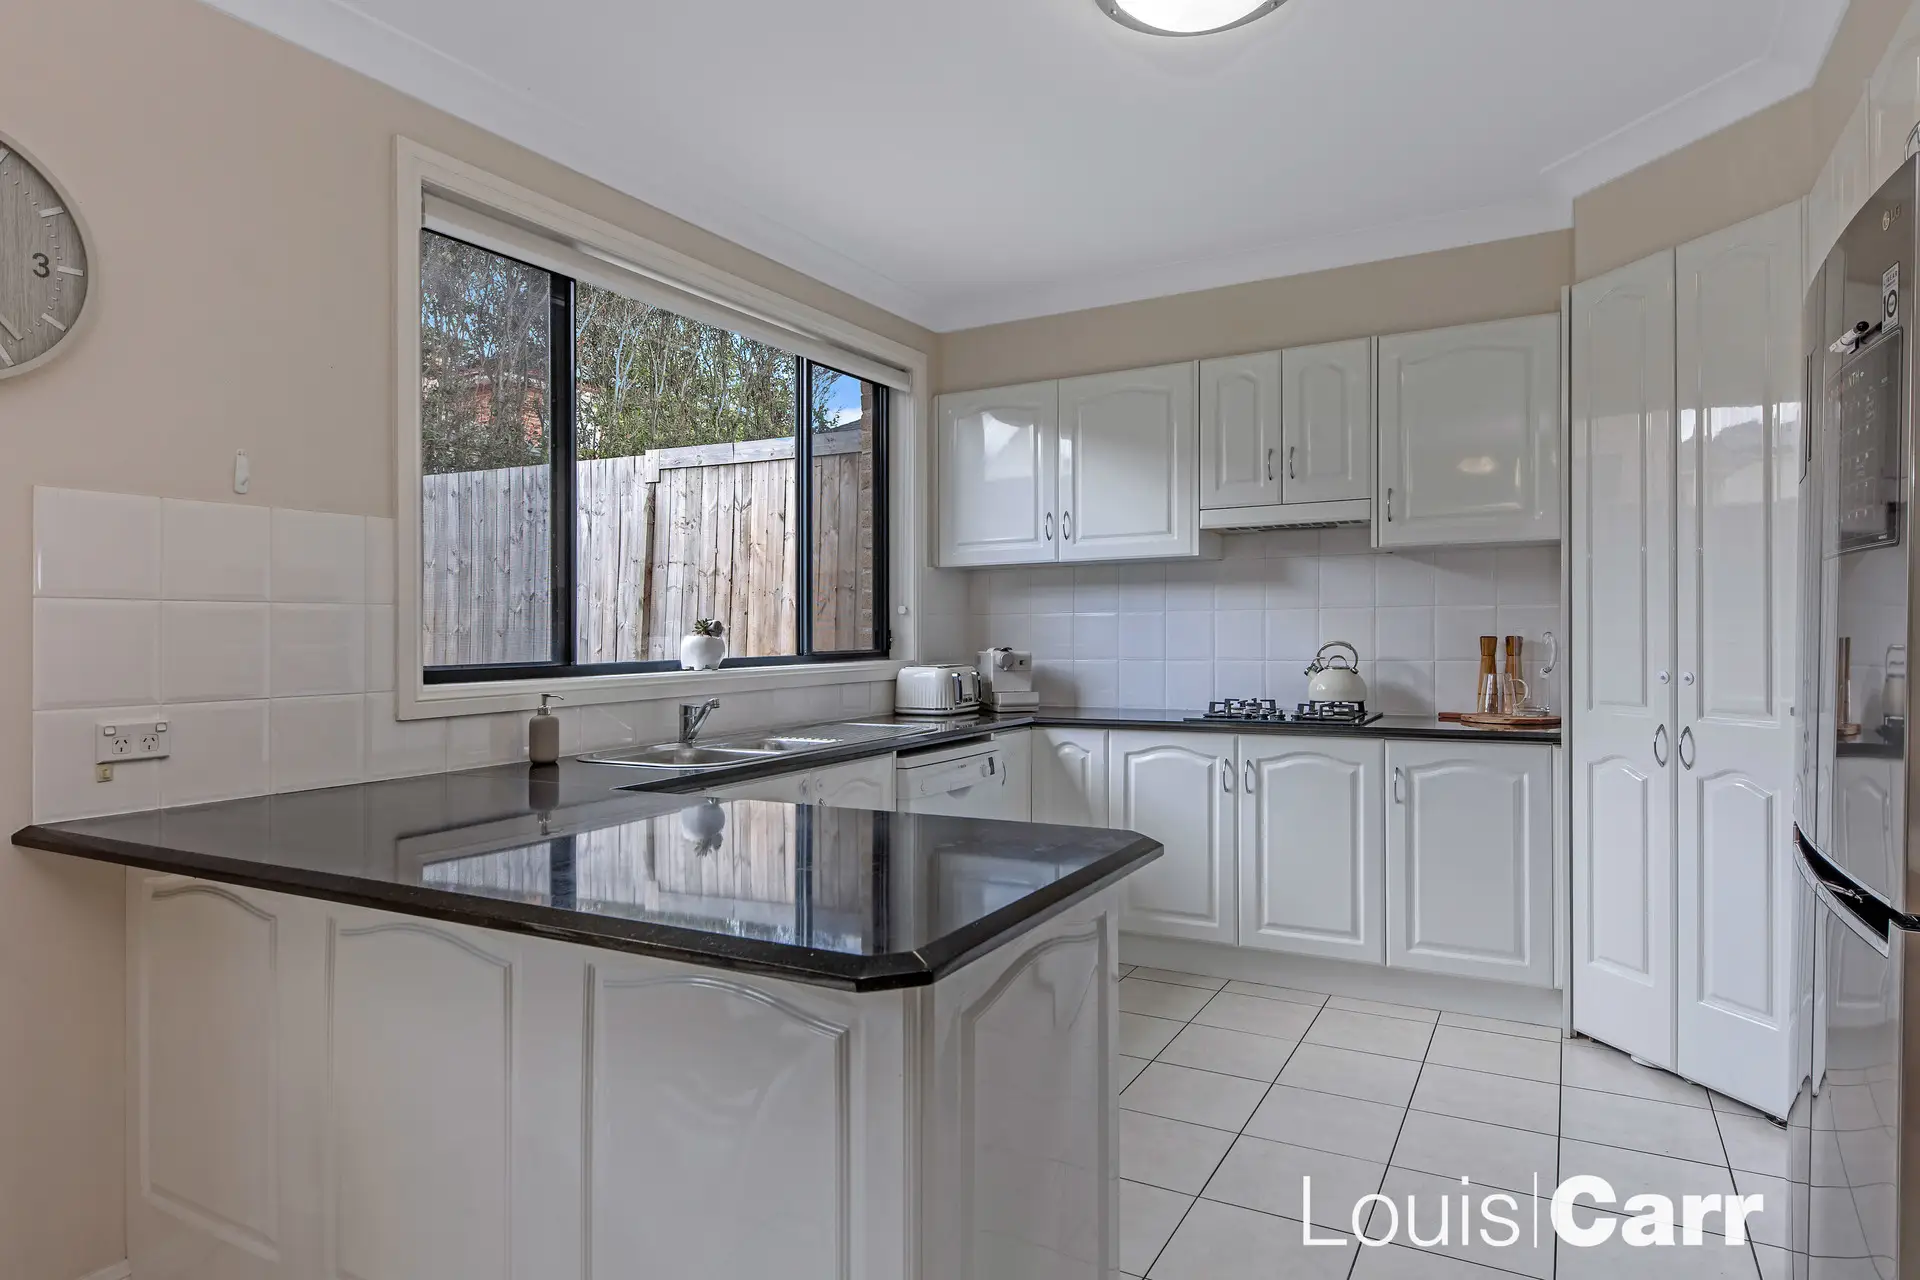 Photo #3: 23 Queensbury Avenue, Kellyville - Sold by Louis Carr Real Estate